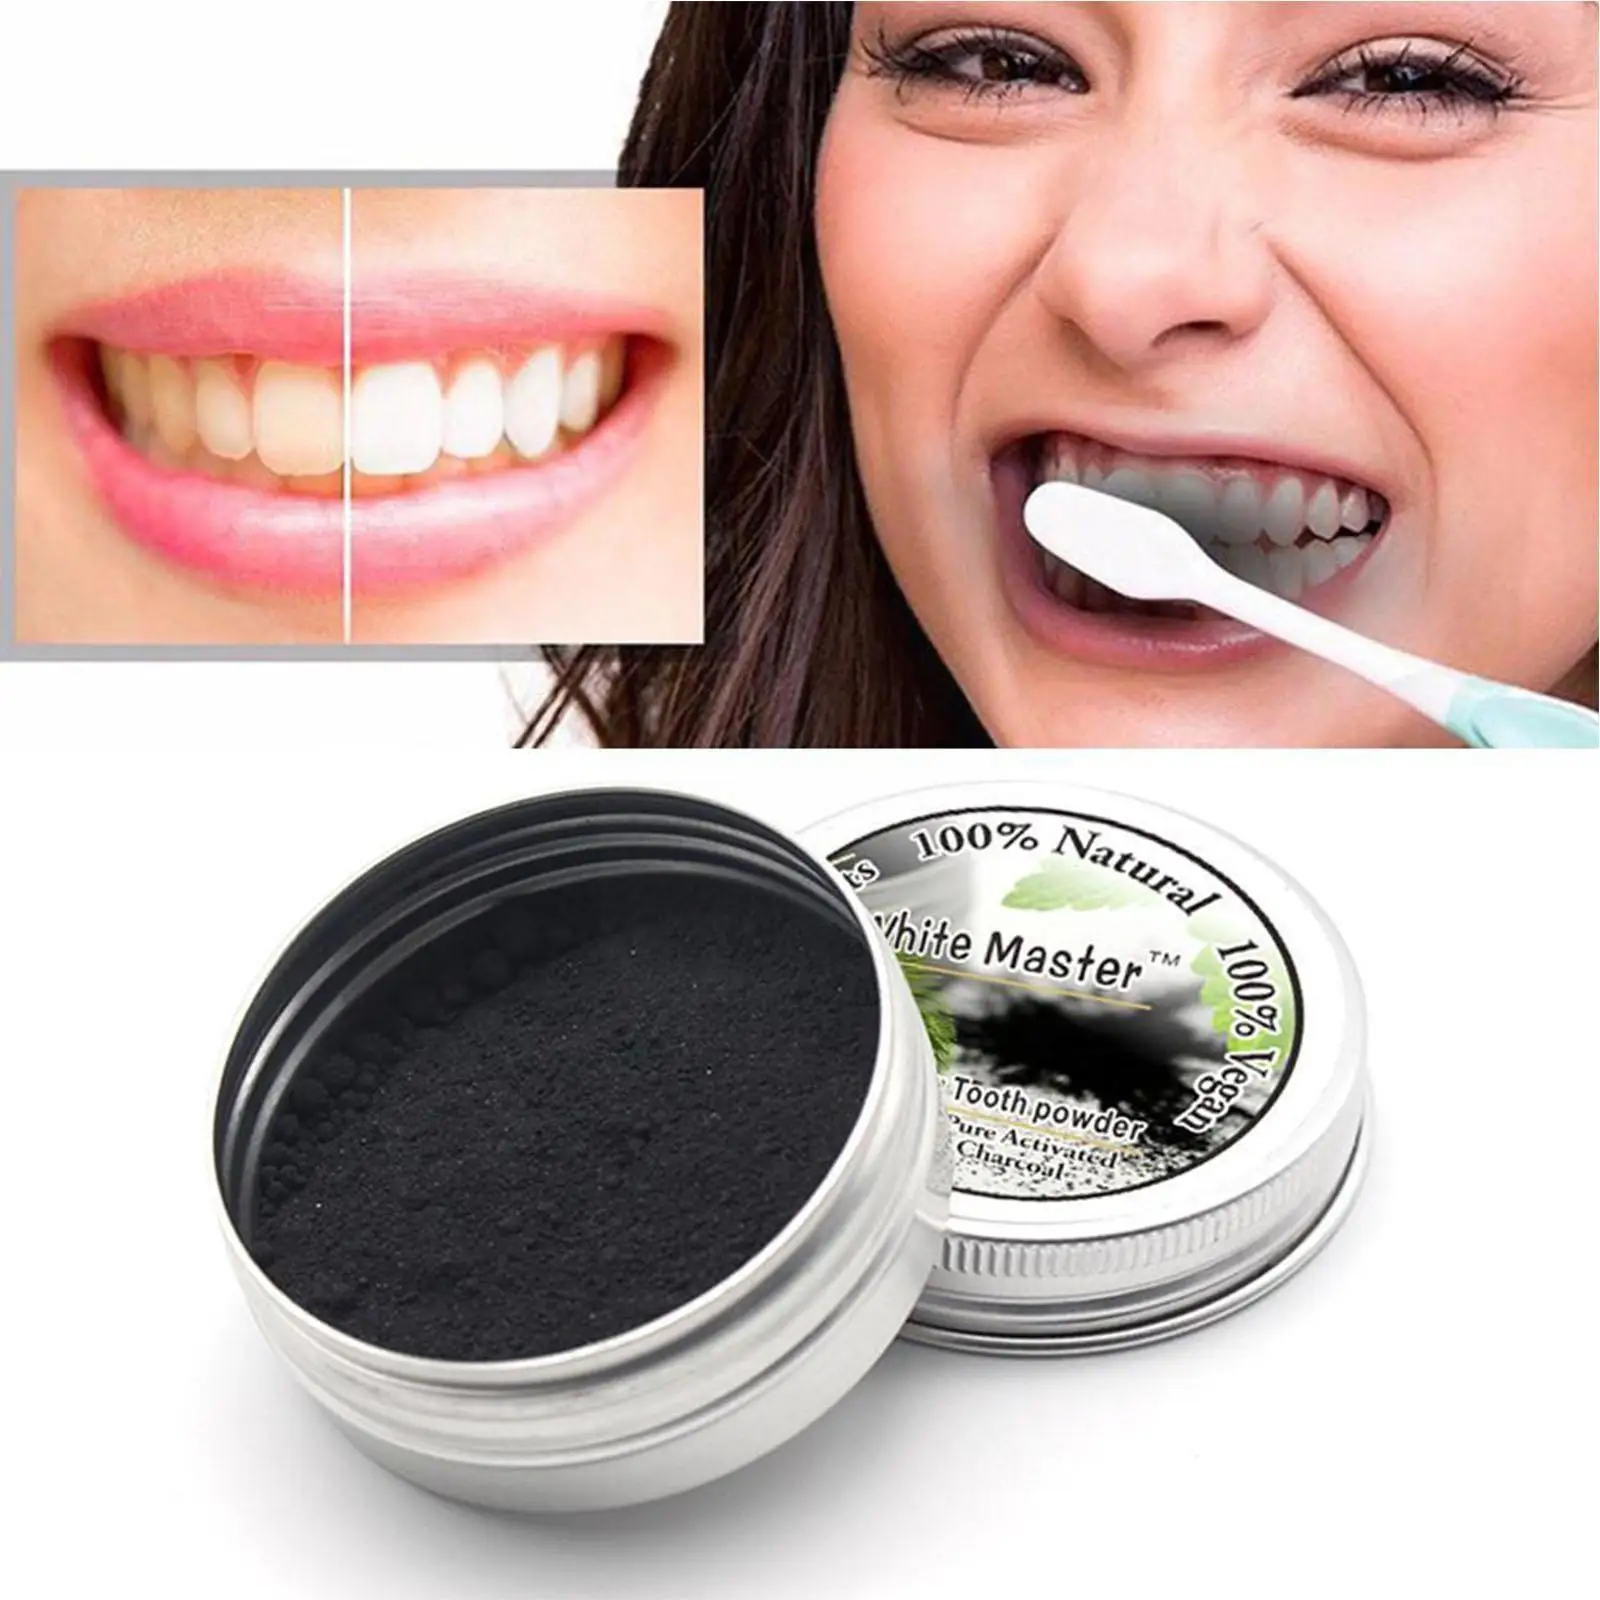 

1pcs Teeth Whitening Powder Black Bamboo Charcoal Powder Tooth Activated Pure Powder Whitening Of Coal D2P8